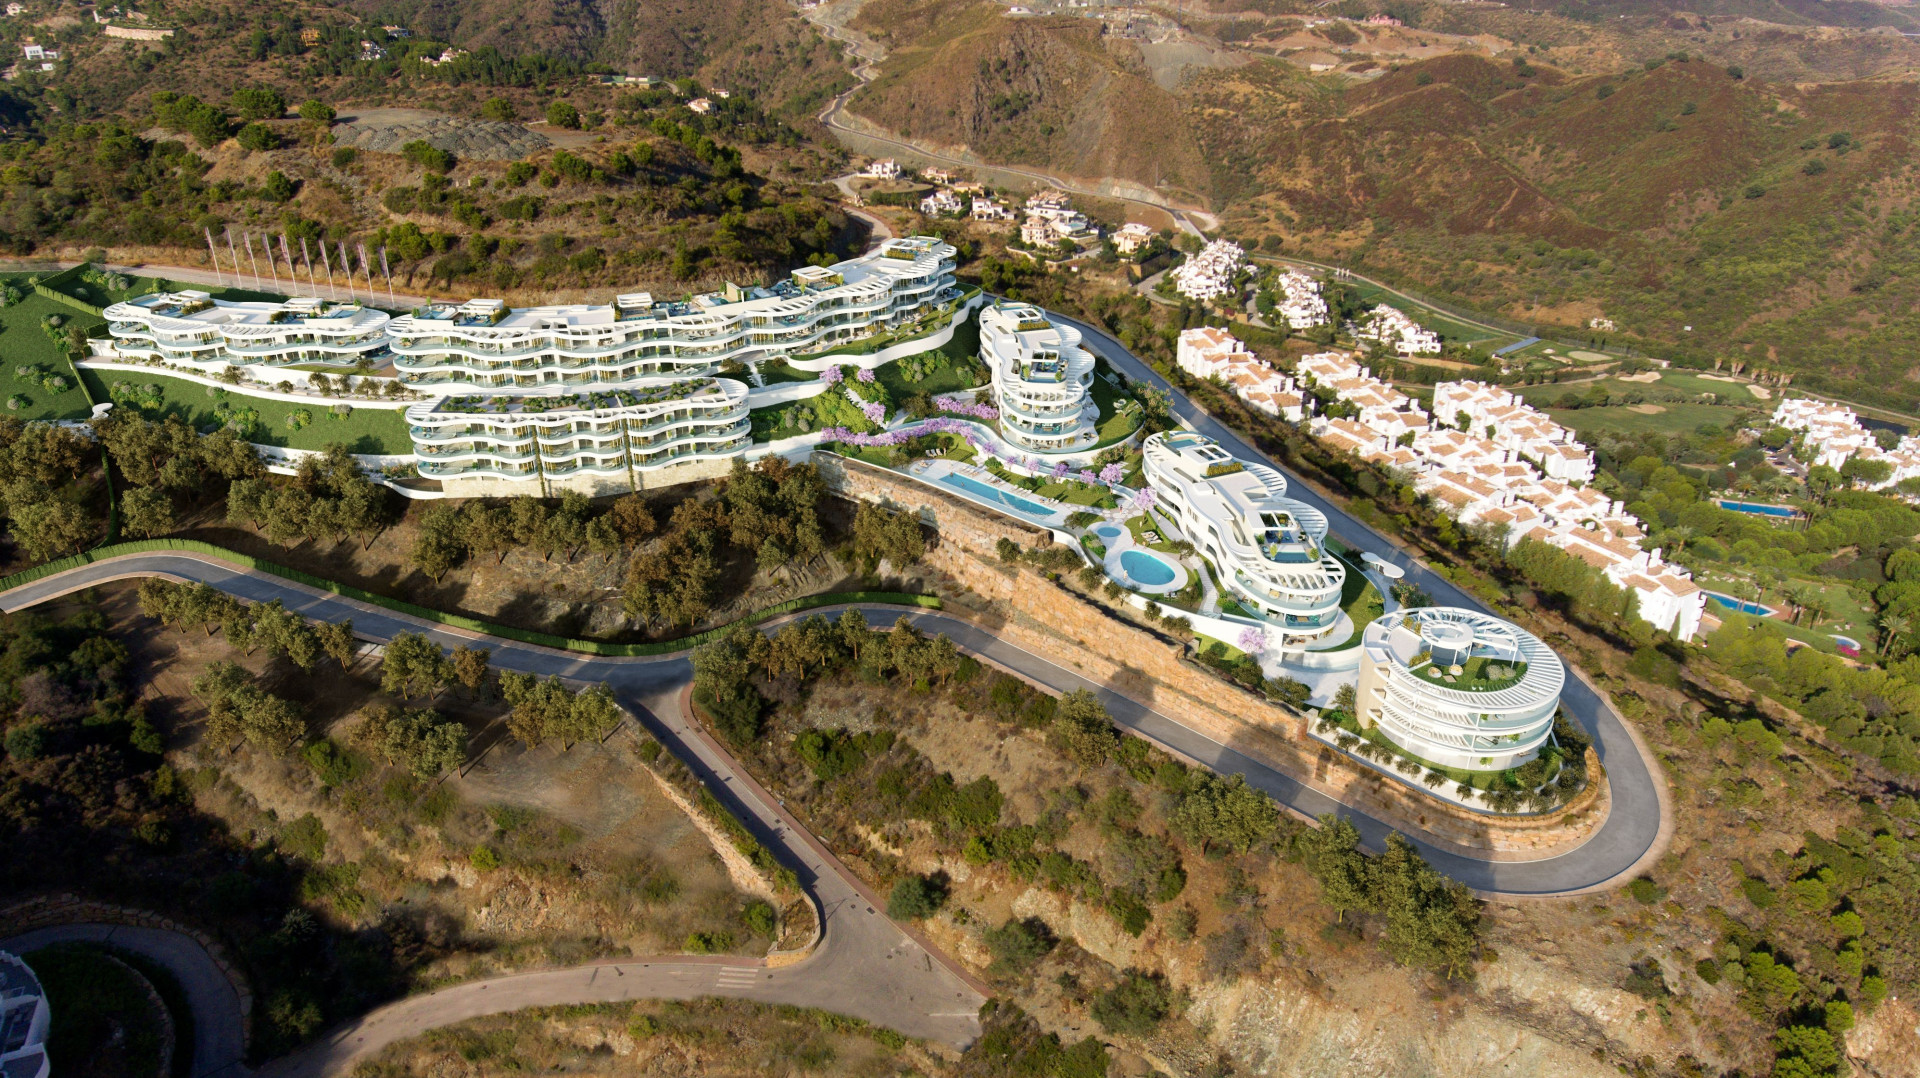 Exclusive new complex in an idyllic location with breathtaking sea views